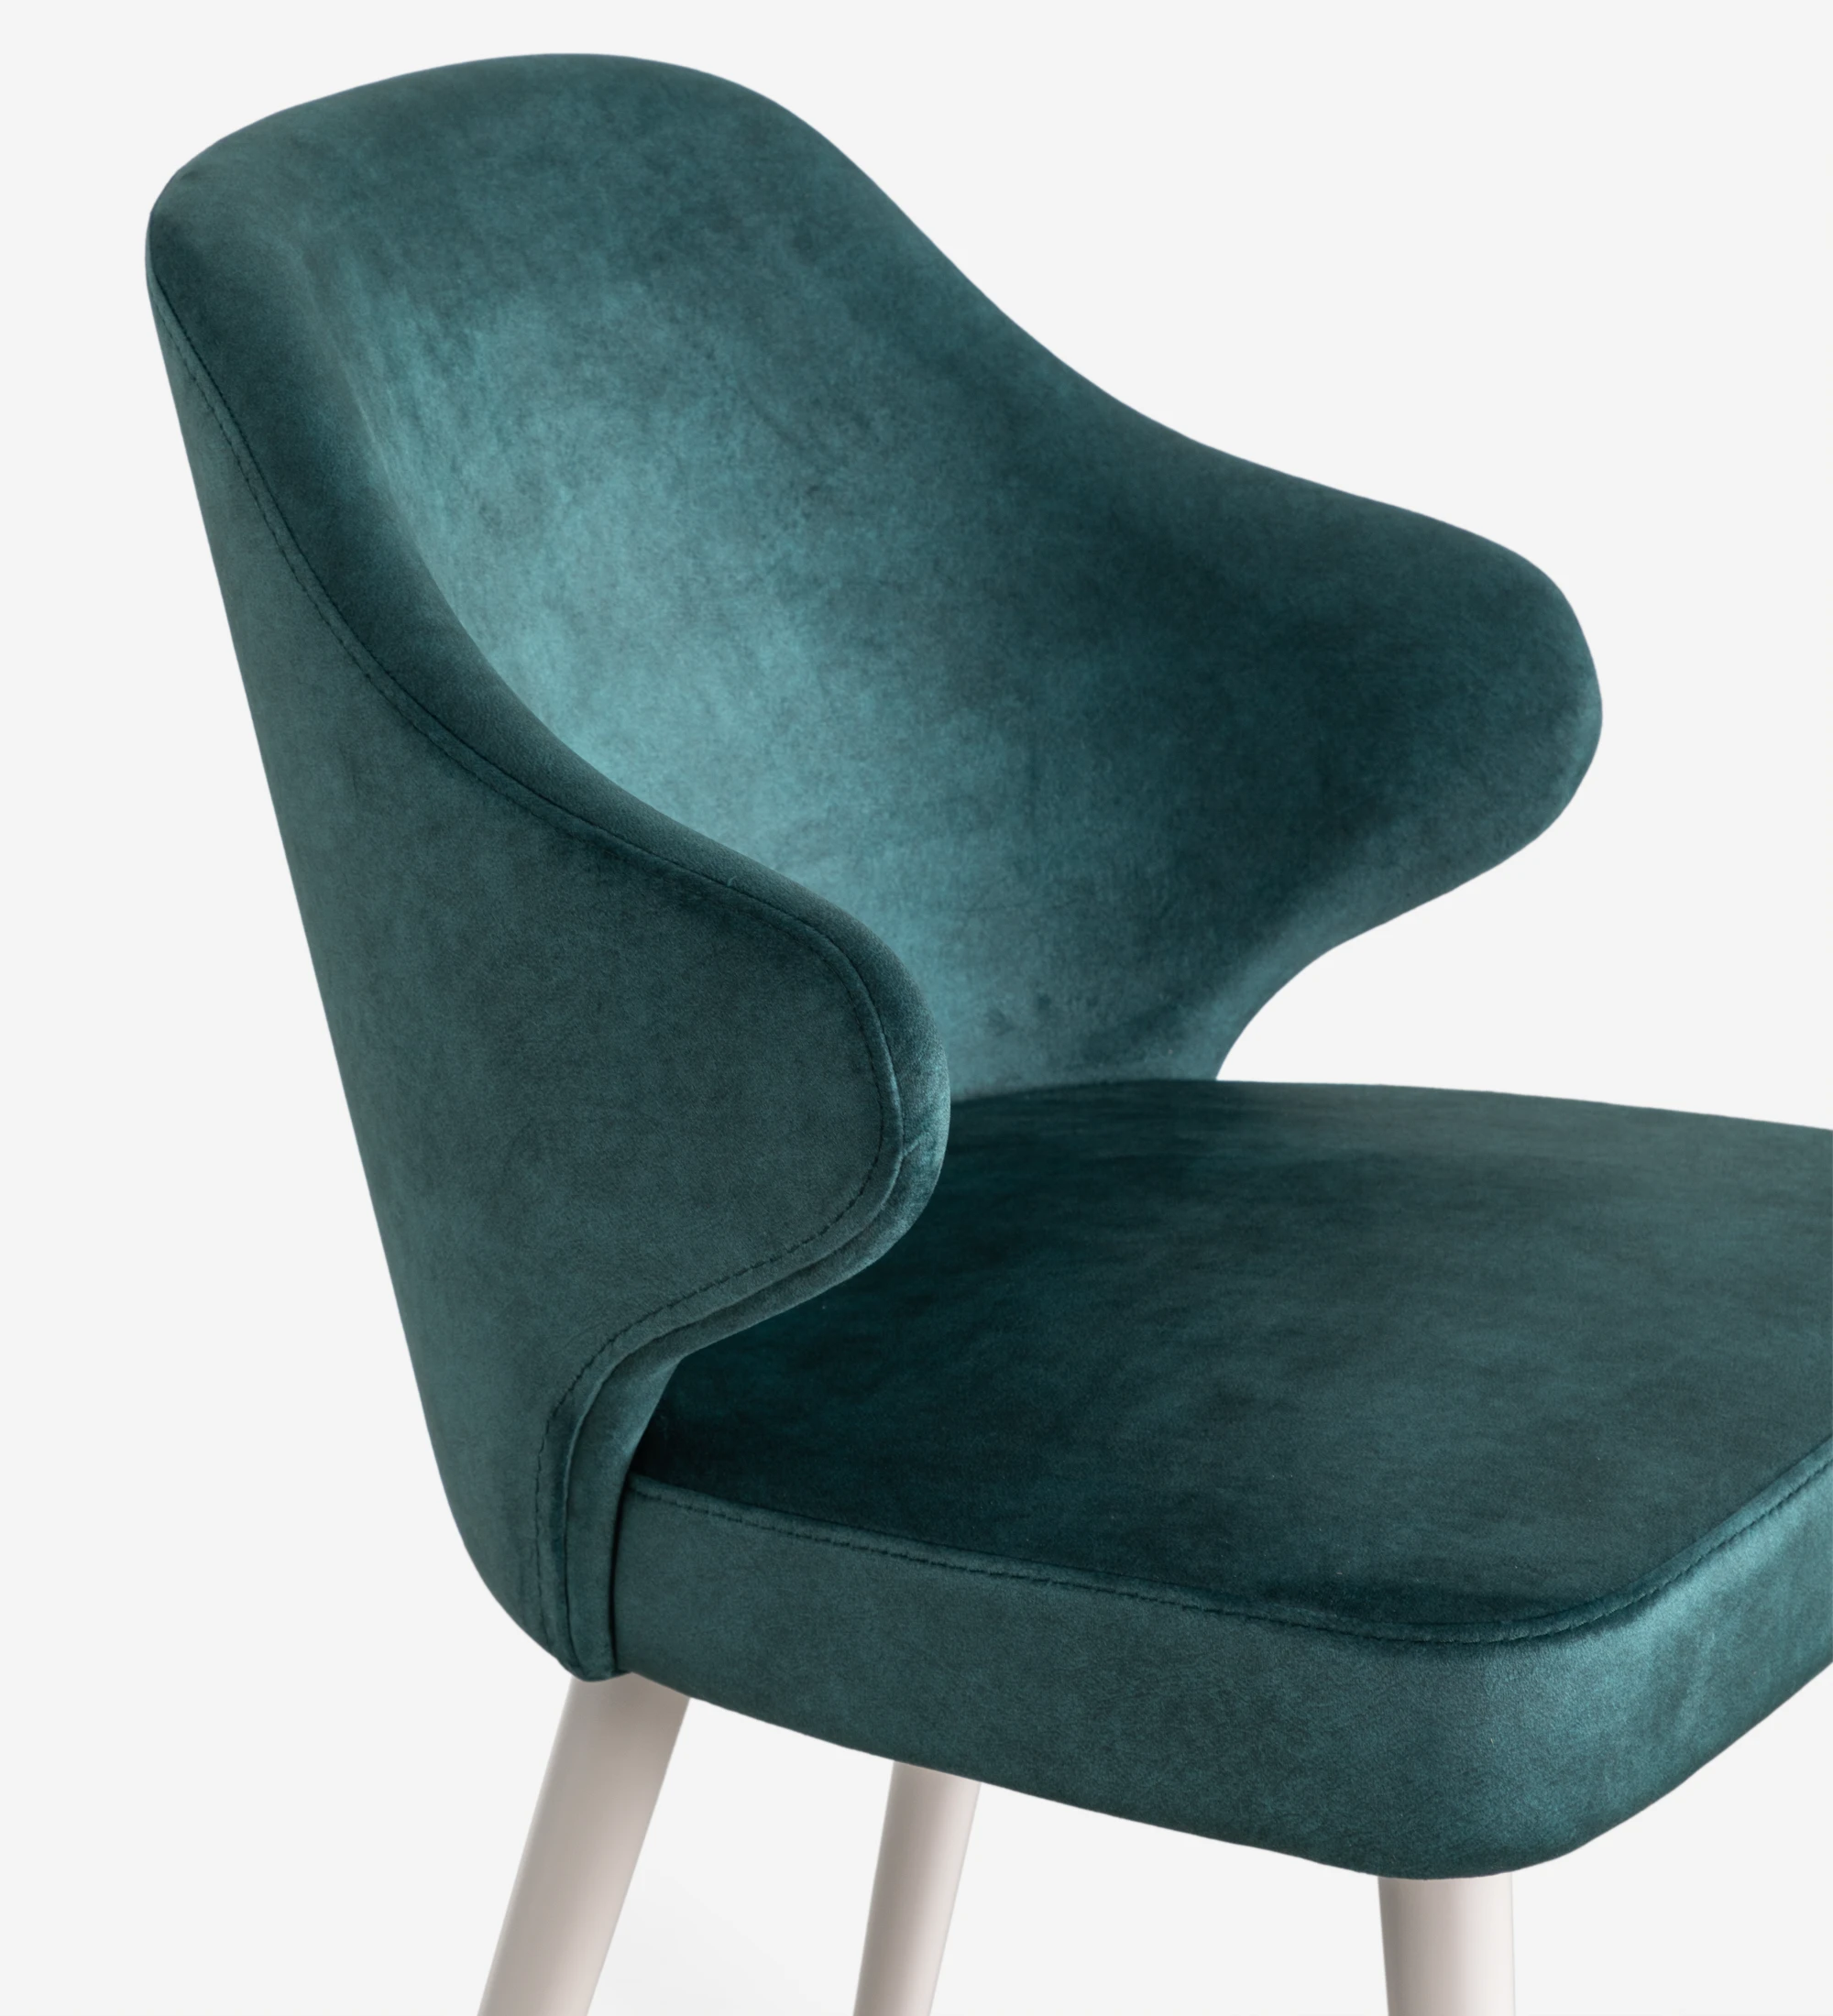 Chair upholstered in petroleum blue fabric, feet lacquered in pearl.